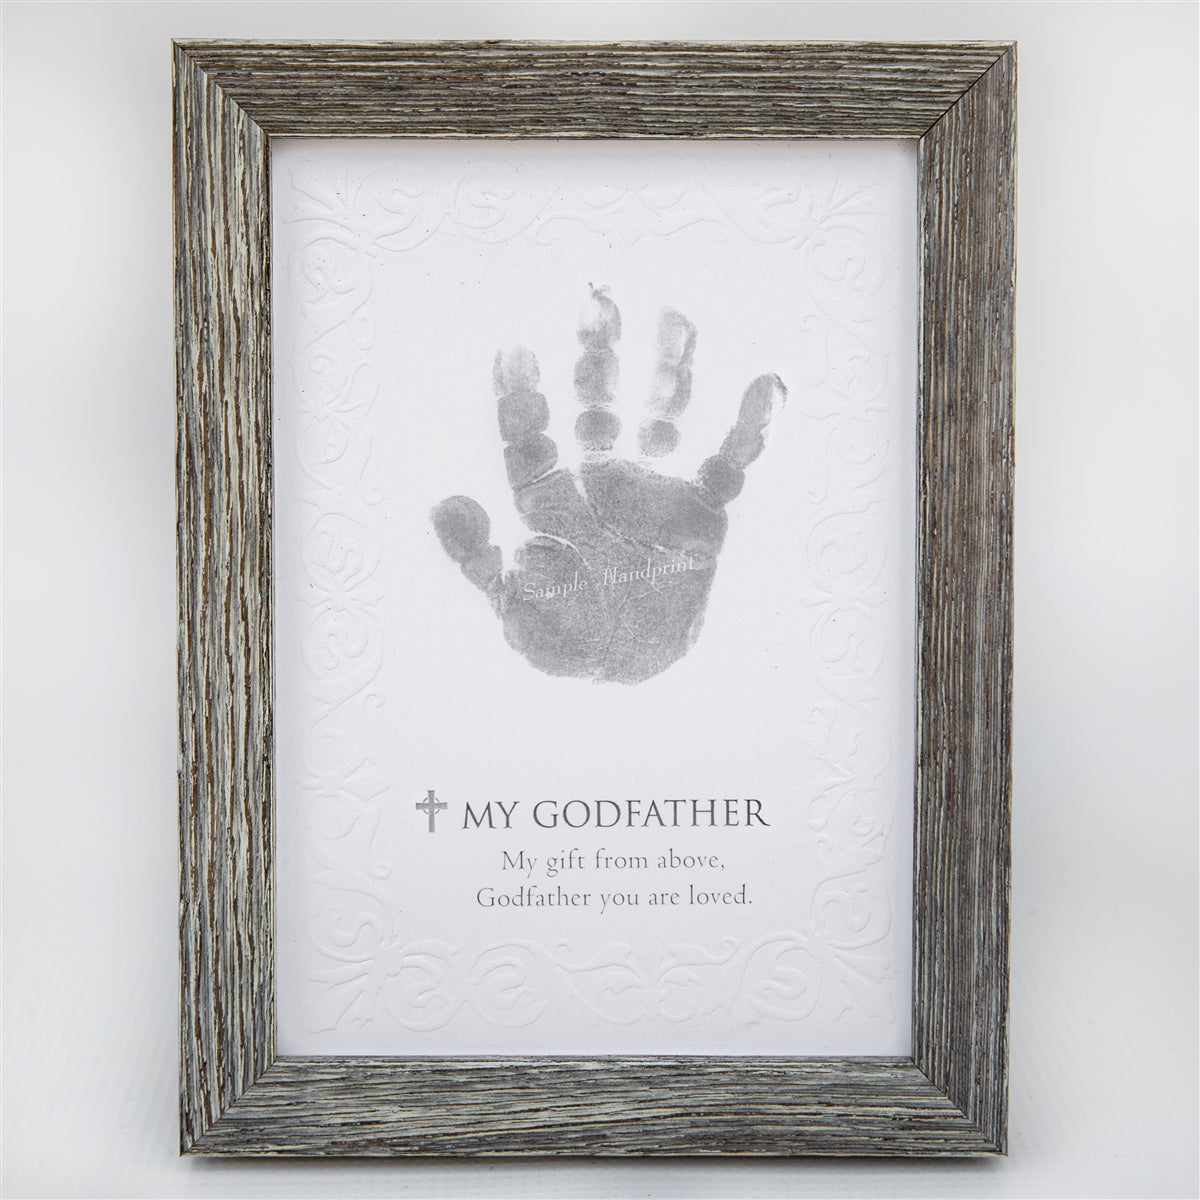 5x7 farmhouse frame with "My Godfather" sentiment on embossed cardstock with space for a child's handprint.